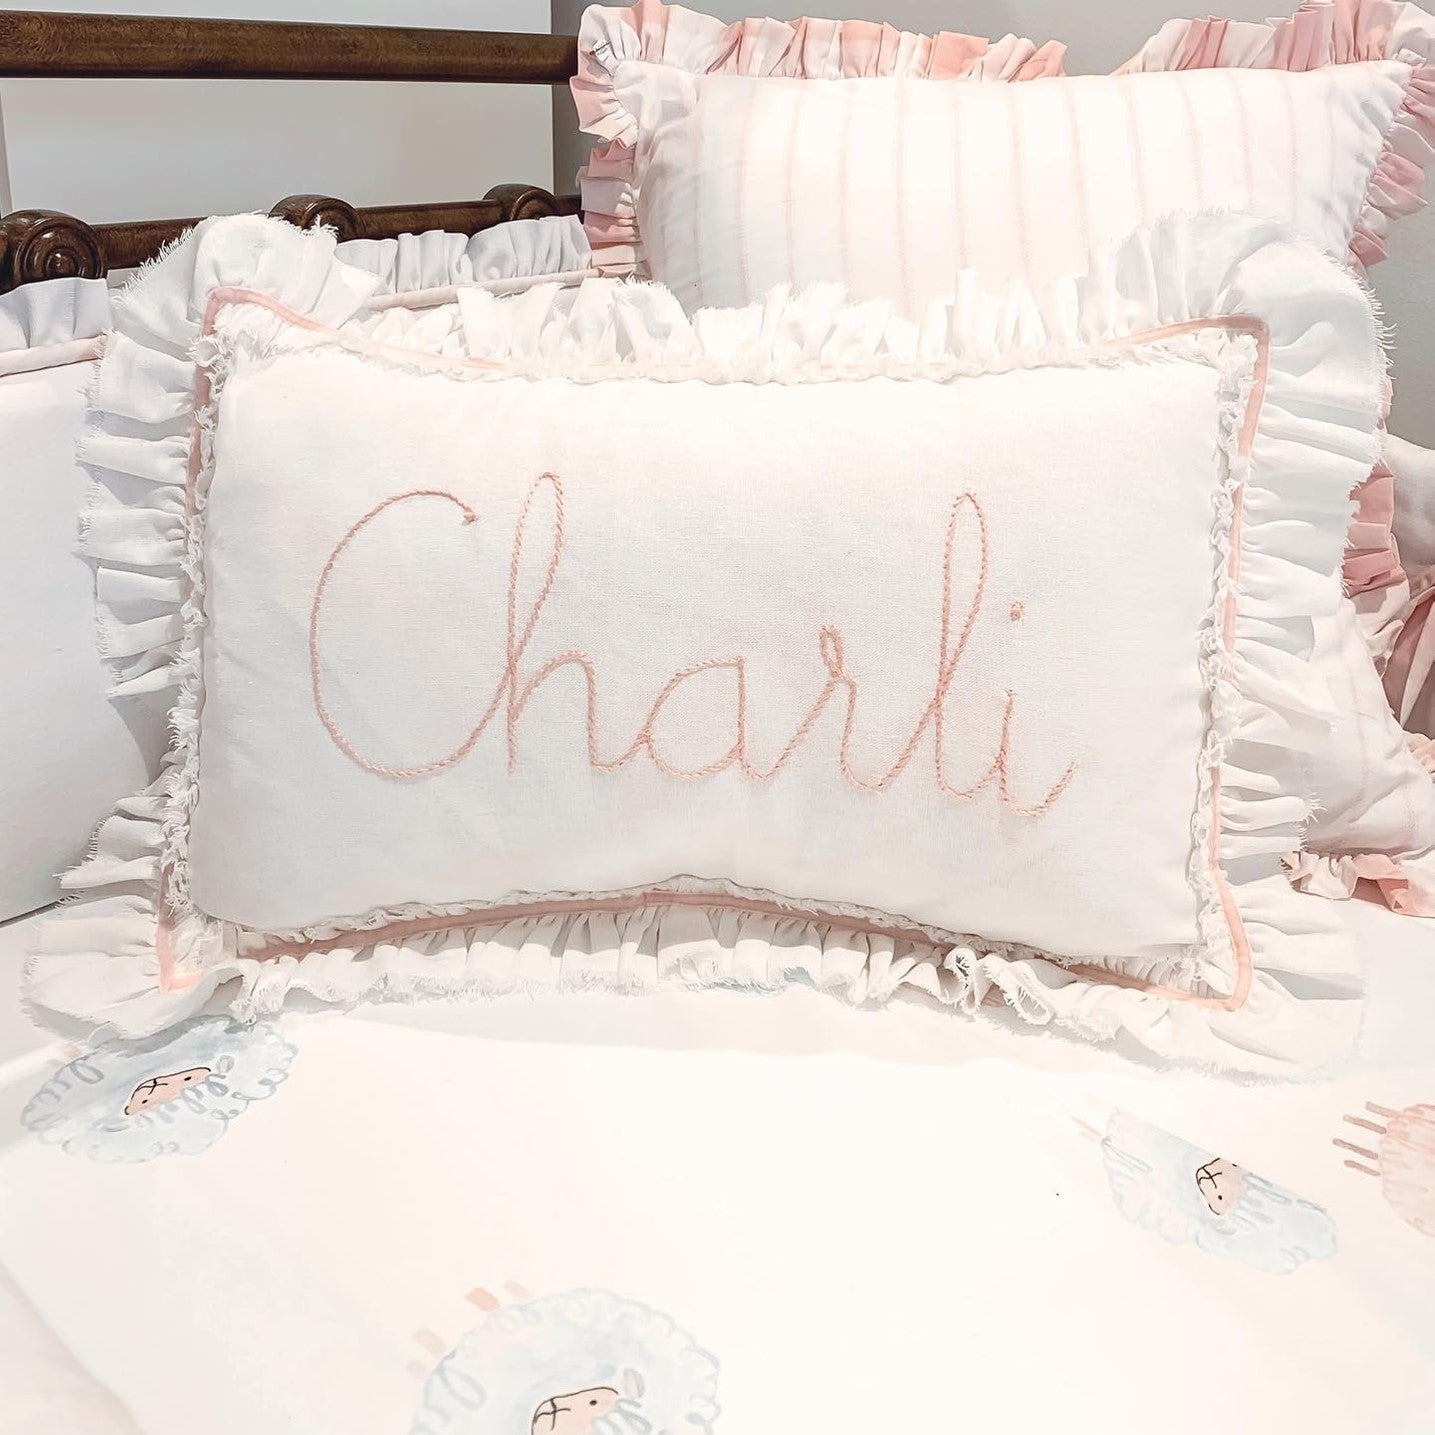 Hand-Embroidered | N-A-M-E Pillow